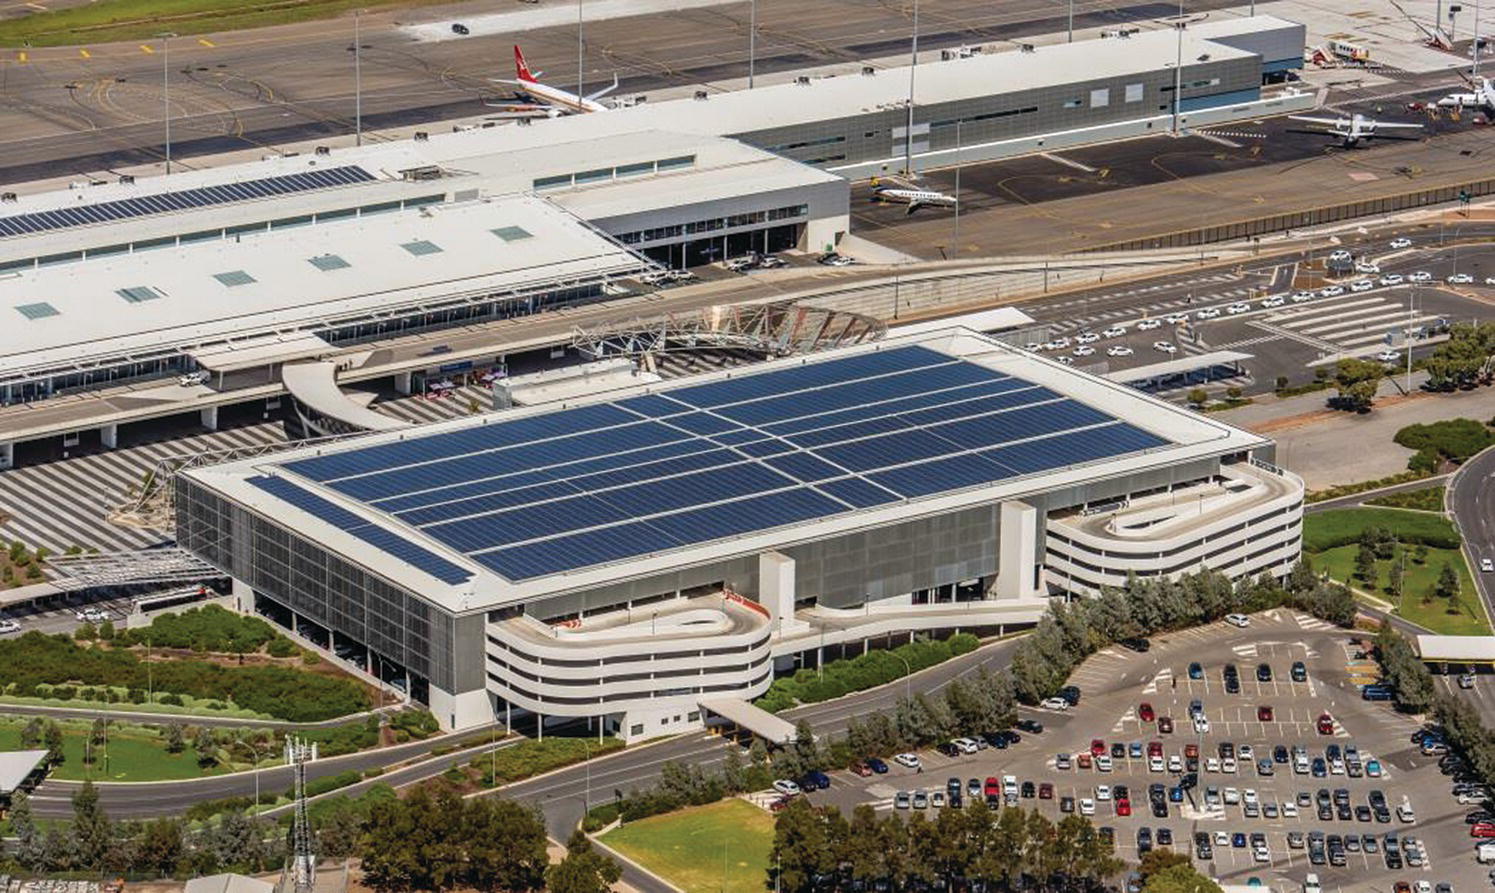 Aerial view of the 1.17 MW PV rooftop system at the Adelaide Airport, Australia.